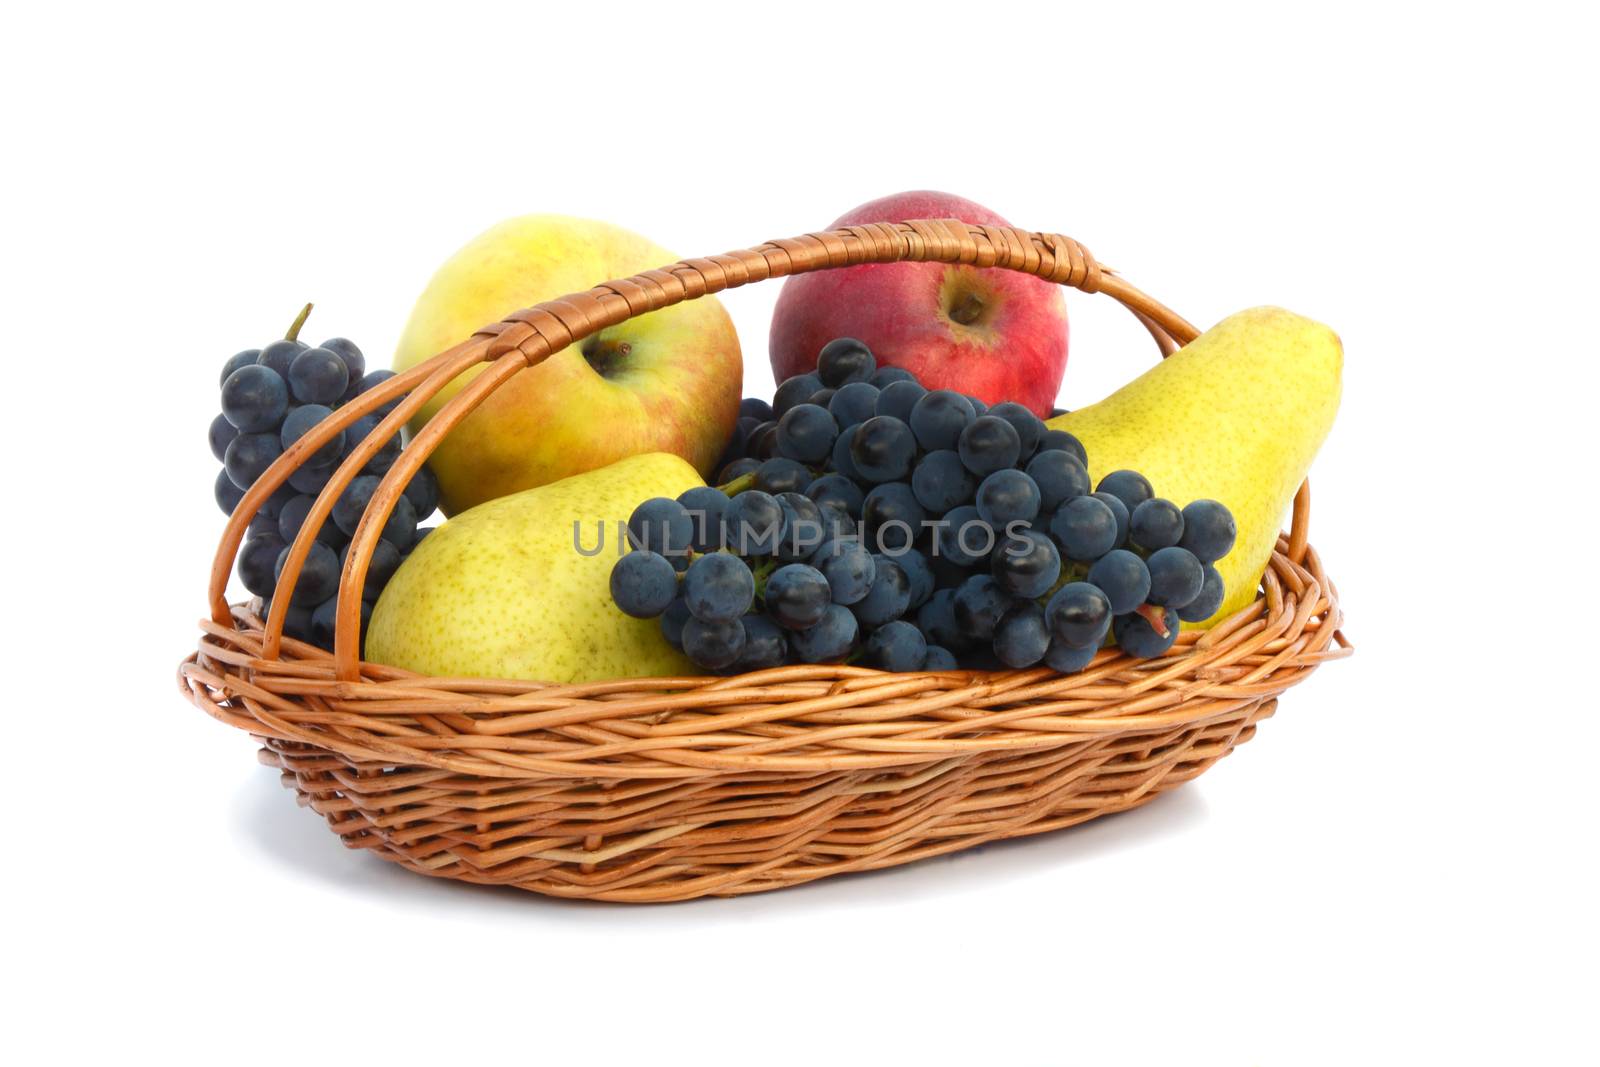 Ripe pears, apples and grapes in a wicker basket. Presented on a white background.